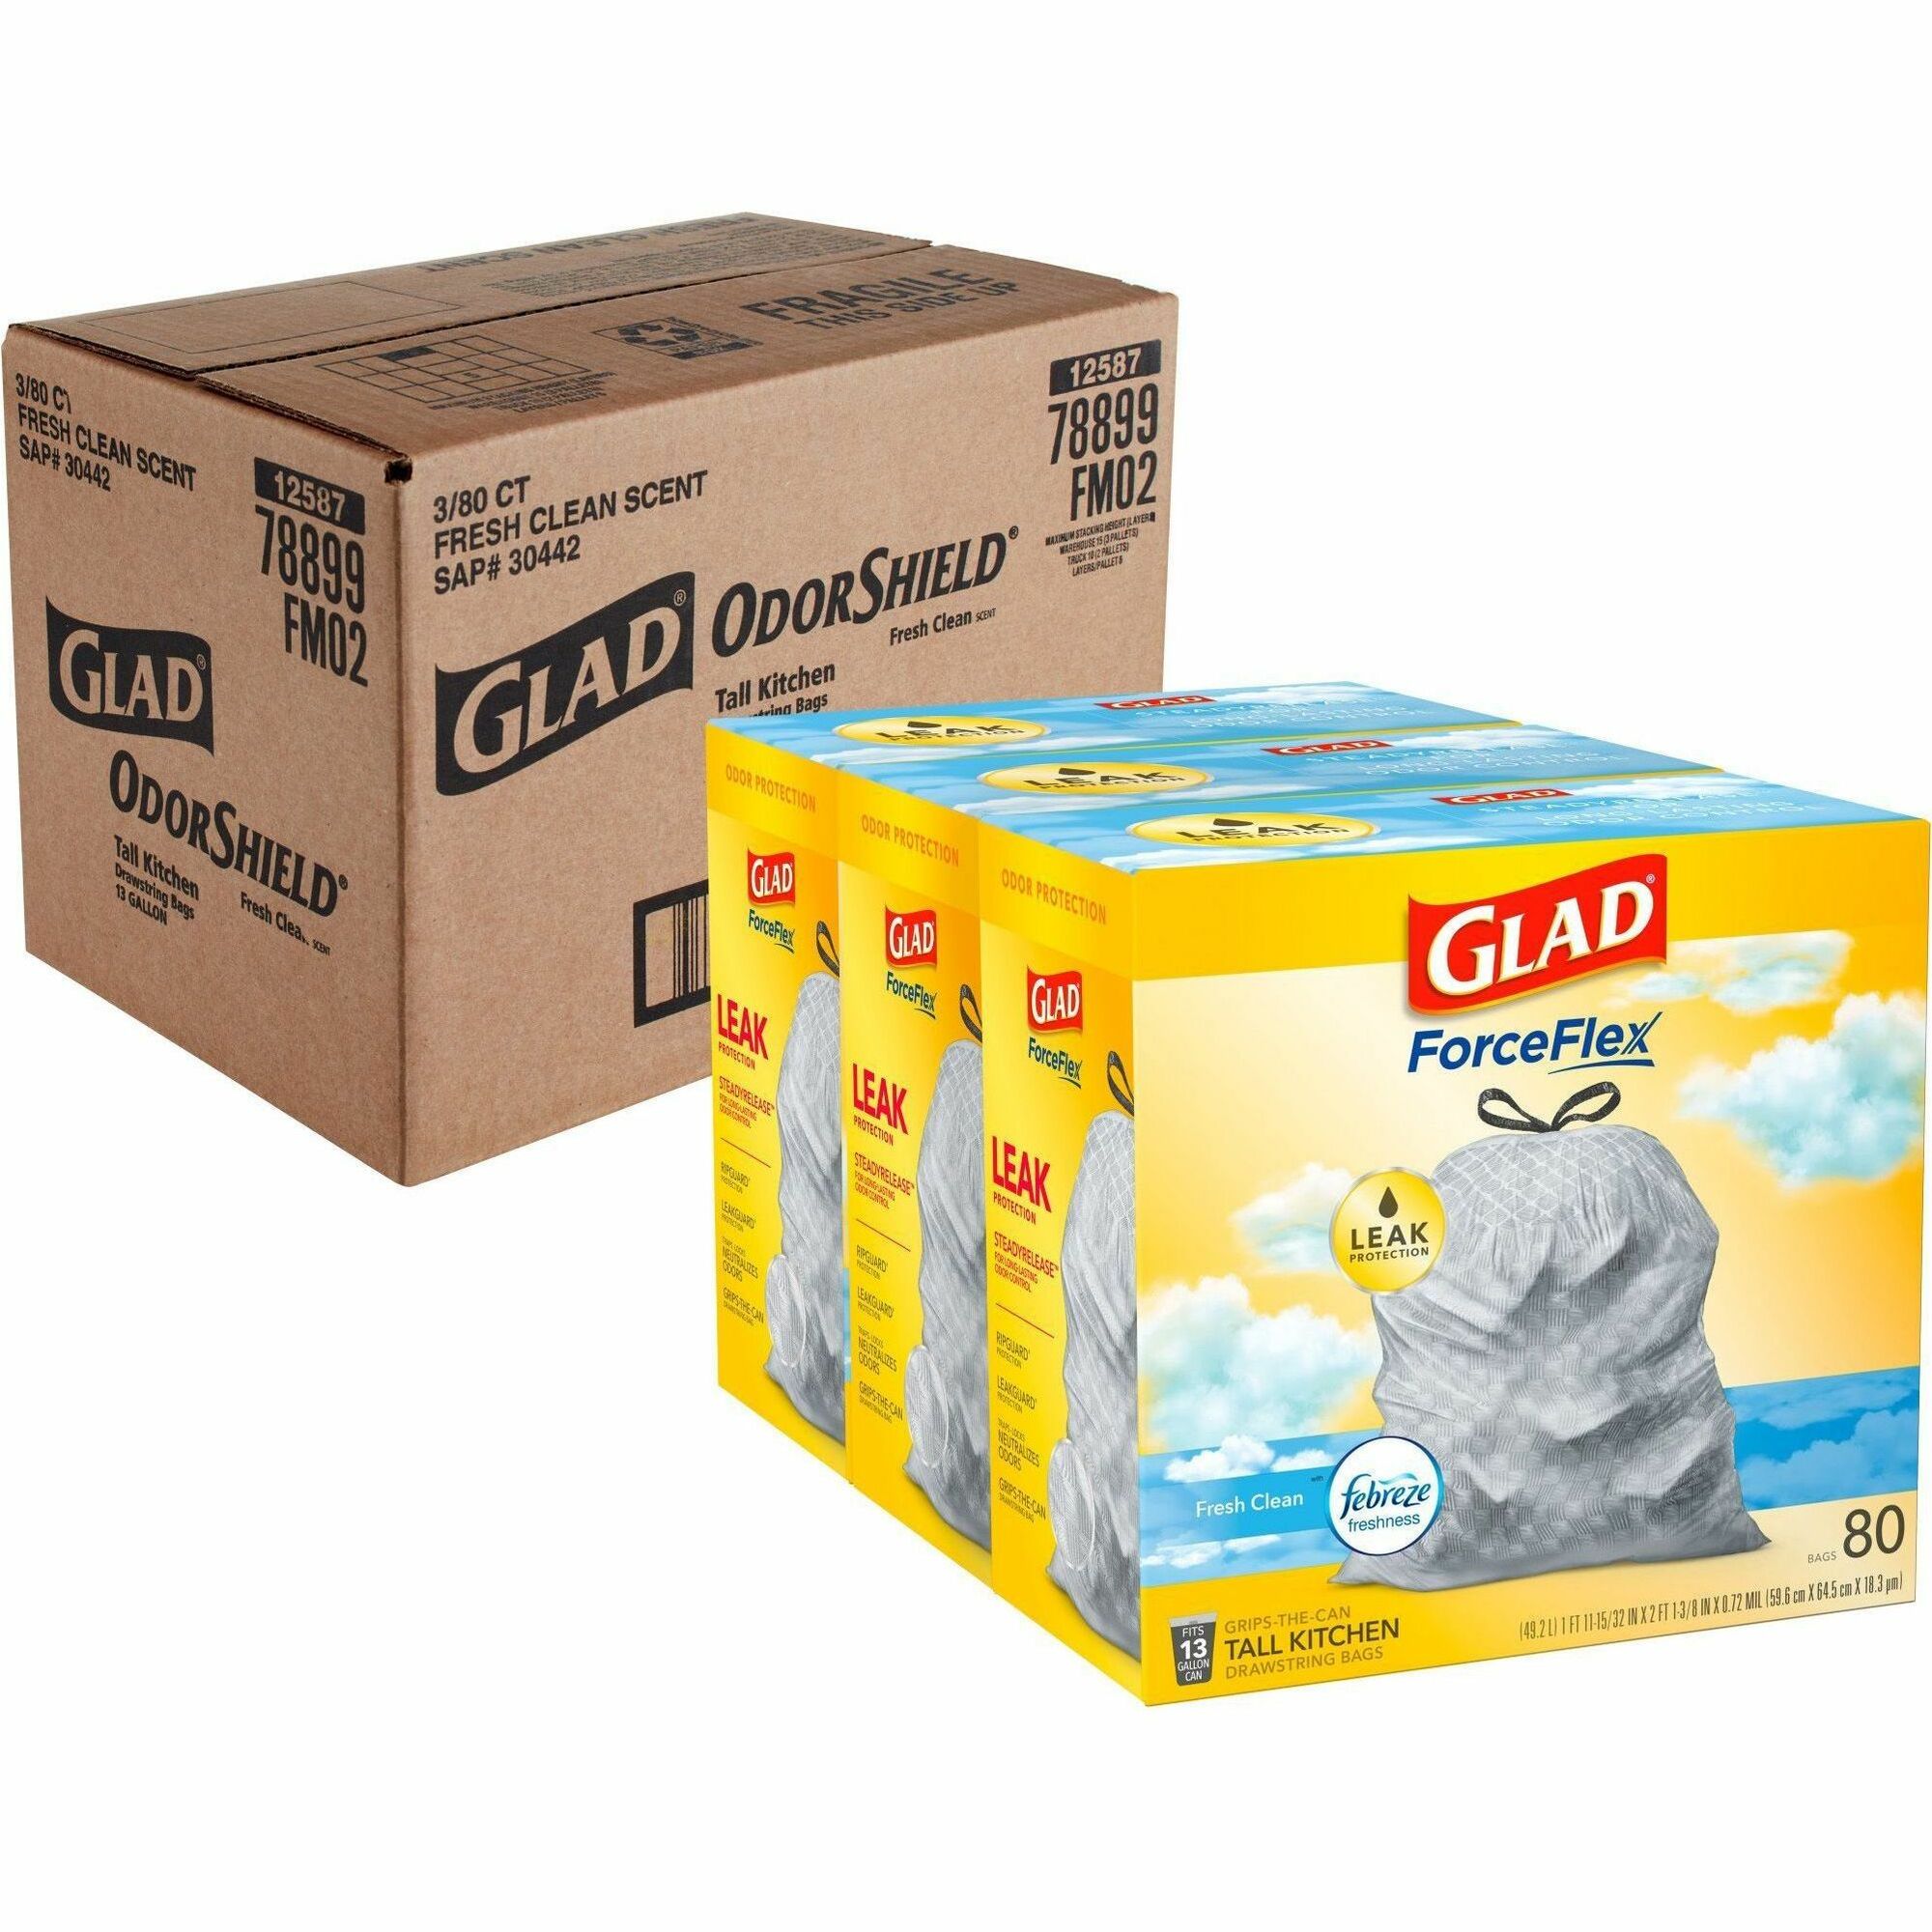 Shop Glad Glad Trash Bags featuring Febreze Fresh Clean Scent in